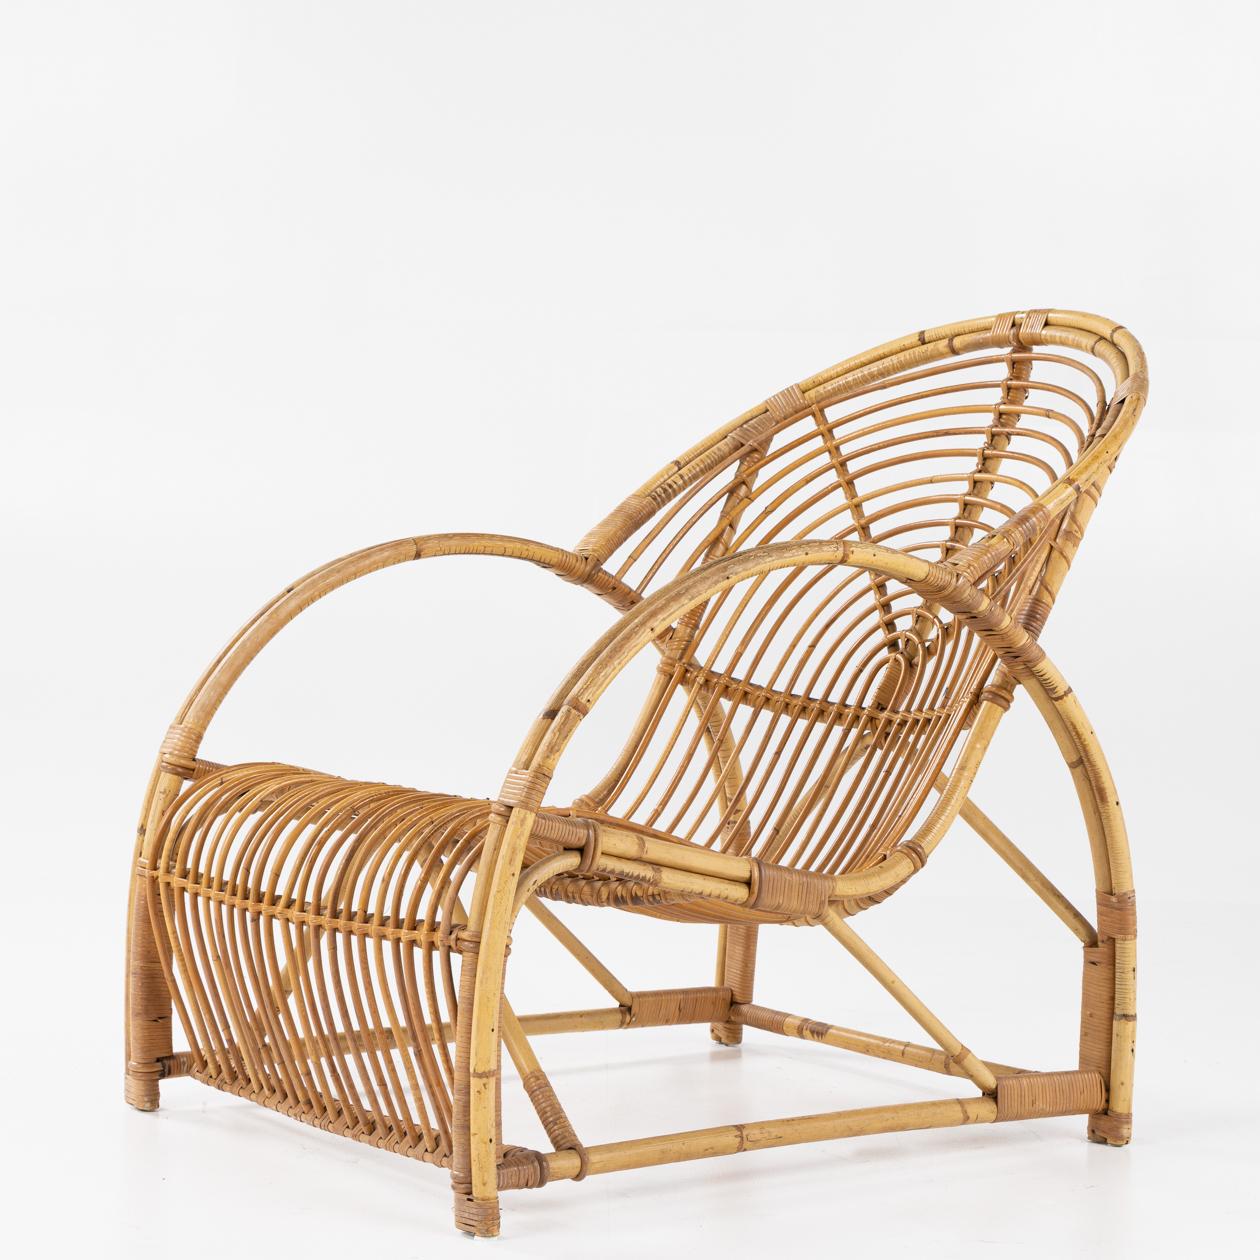 Bamboo easy chair with round back. Maker Wengler